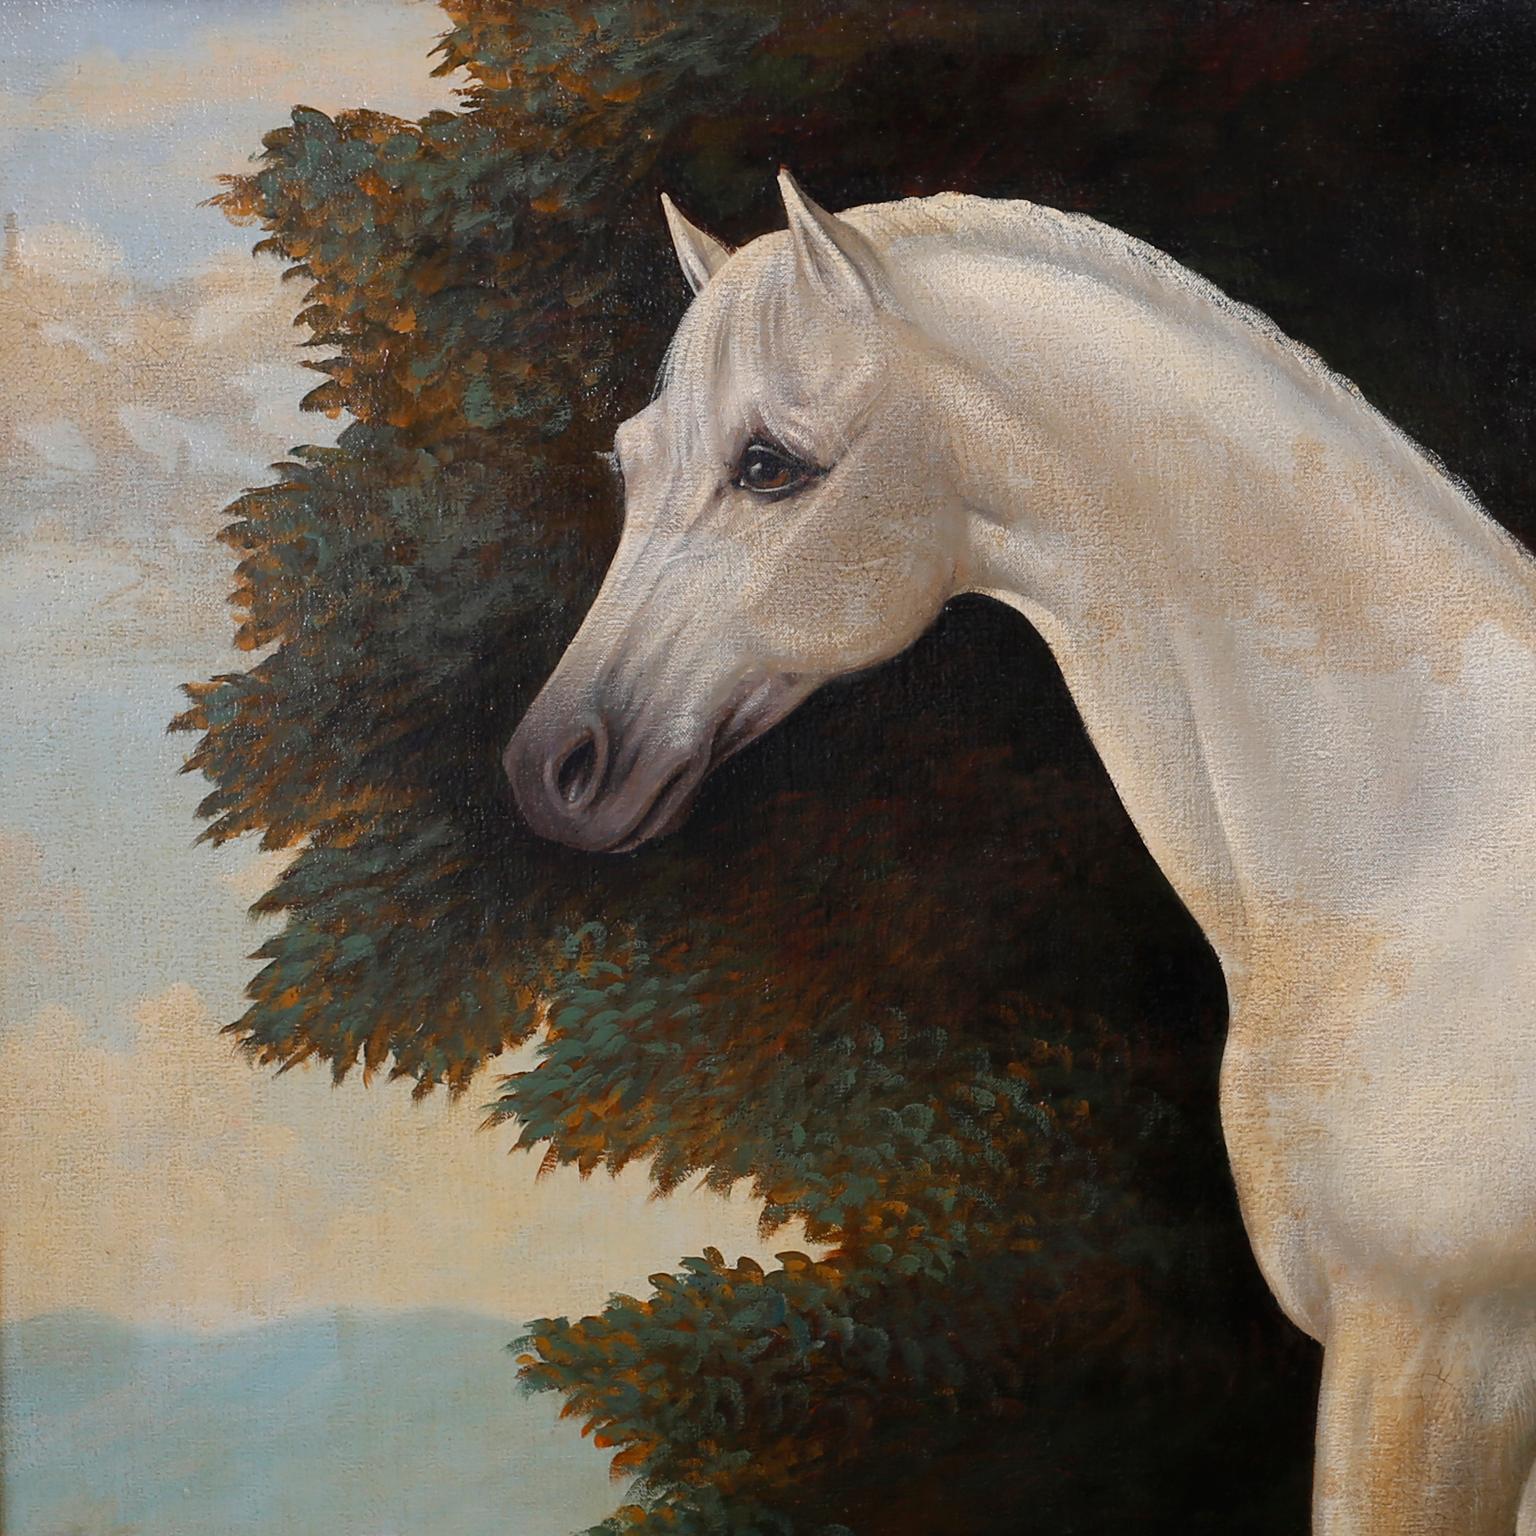 Oil painting on canvas of a show horse set free in a woodland scene, confidently executed in a tongue-in-cheek Victorian parlor painting style with contrived aging and distressed finish. Signed William Skilling in the lower right.